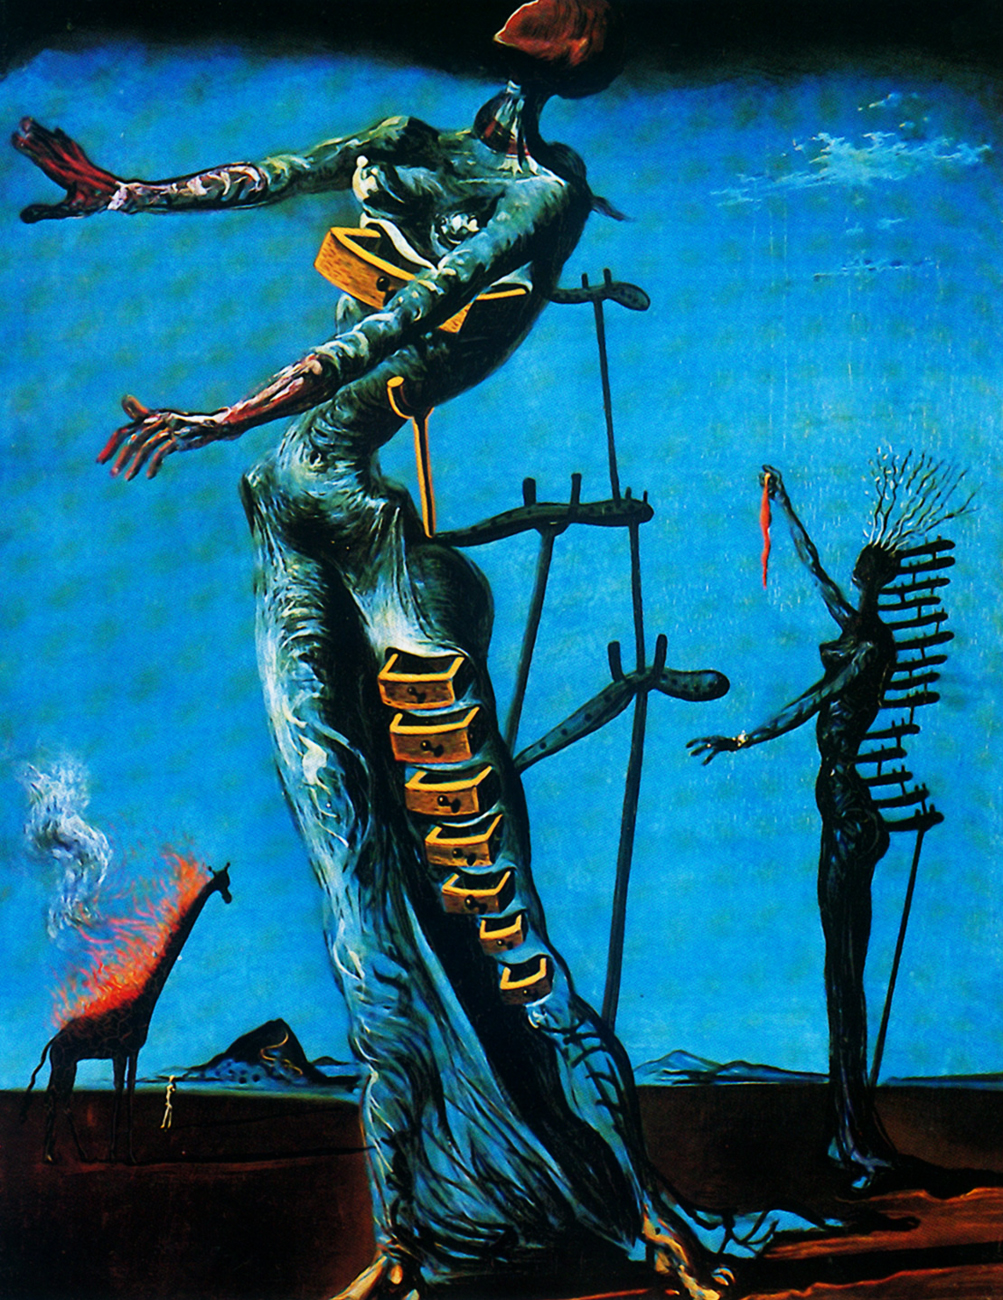 Burning Giraffe by Salvador Dalí - 1937 - 35 × 27 cm private collection